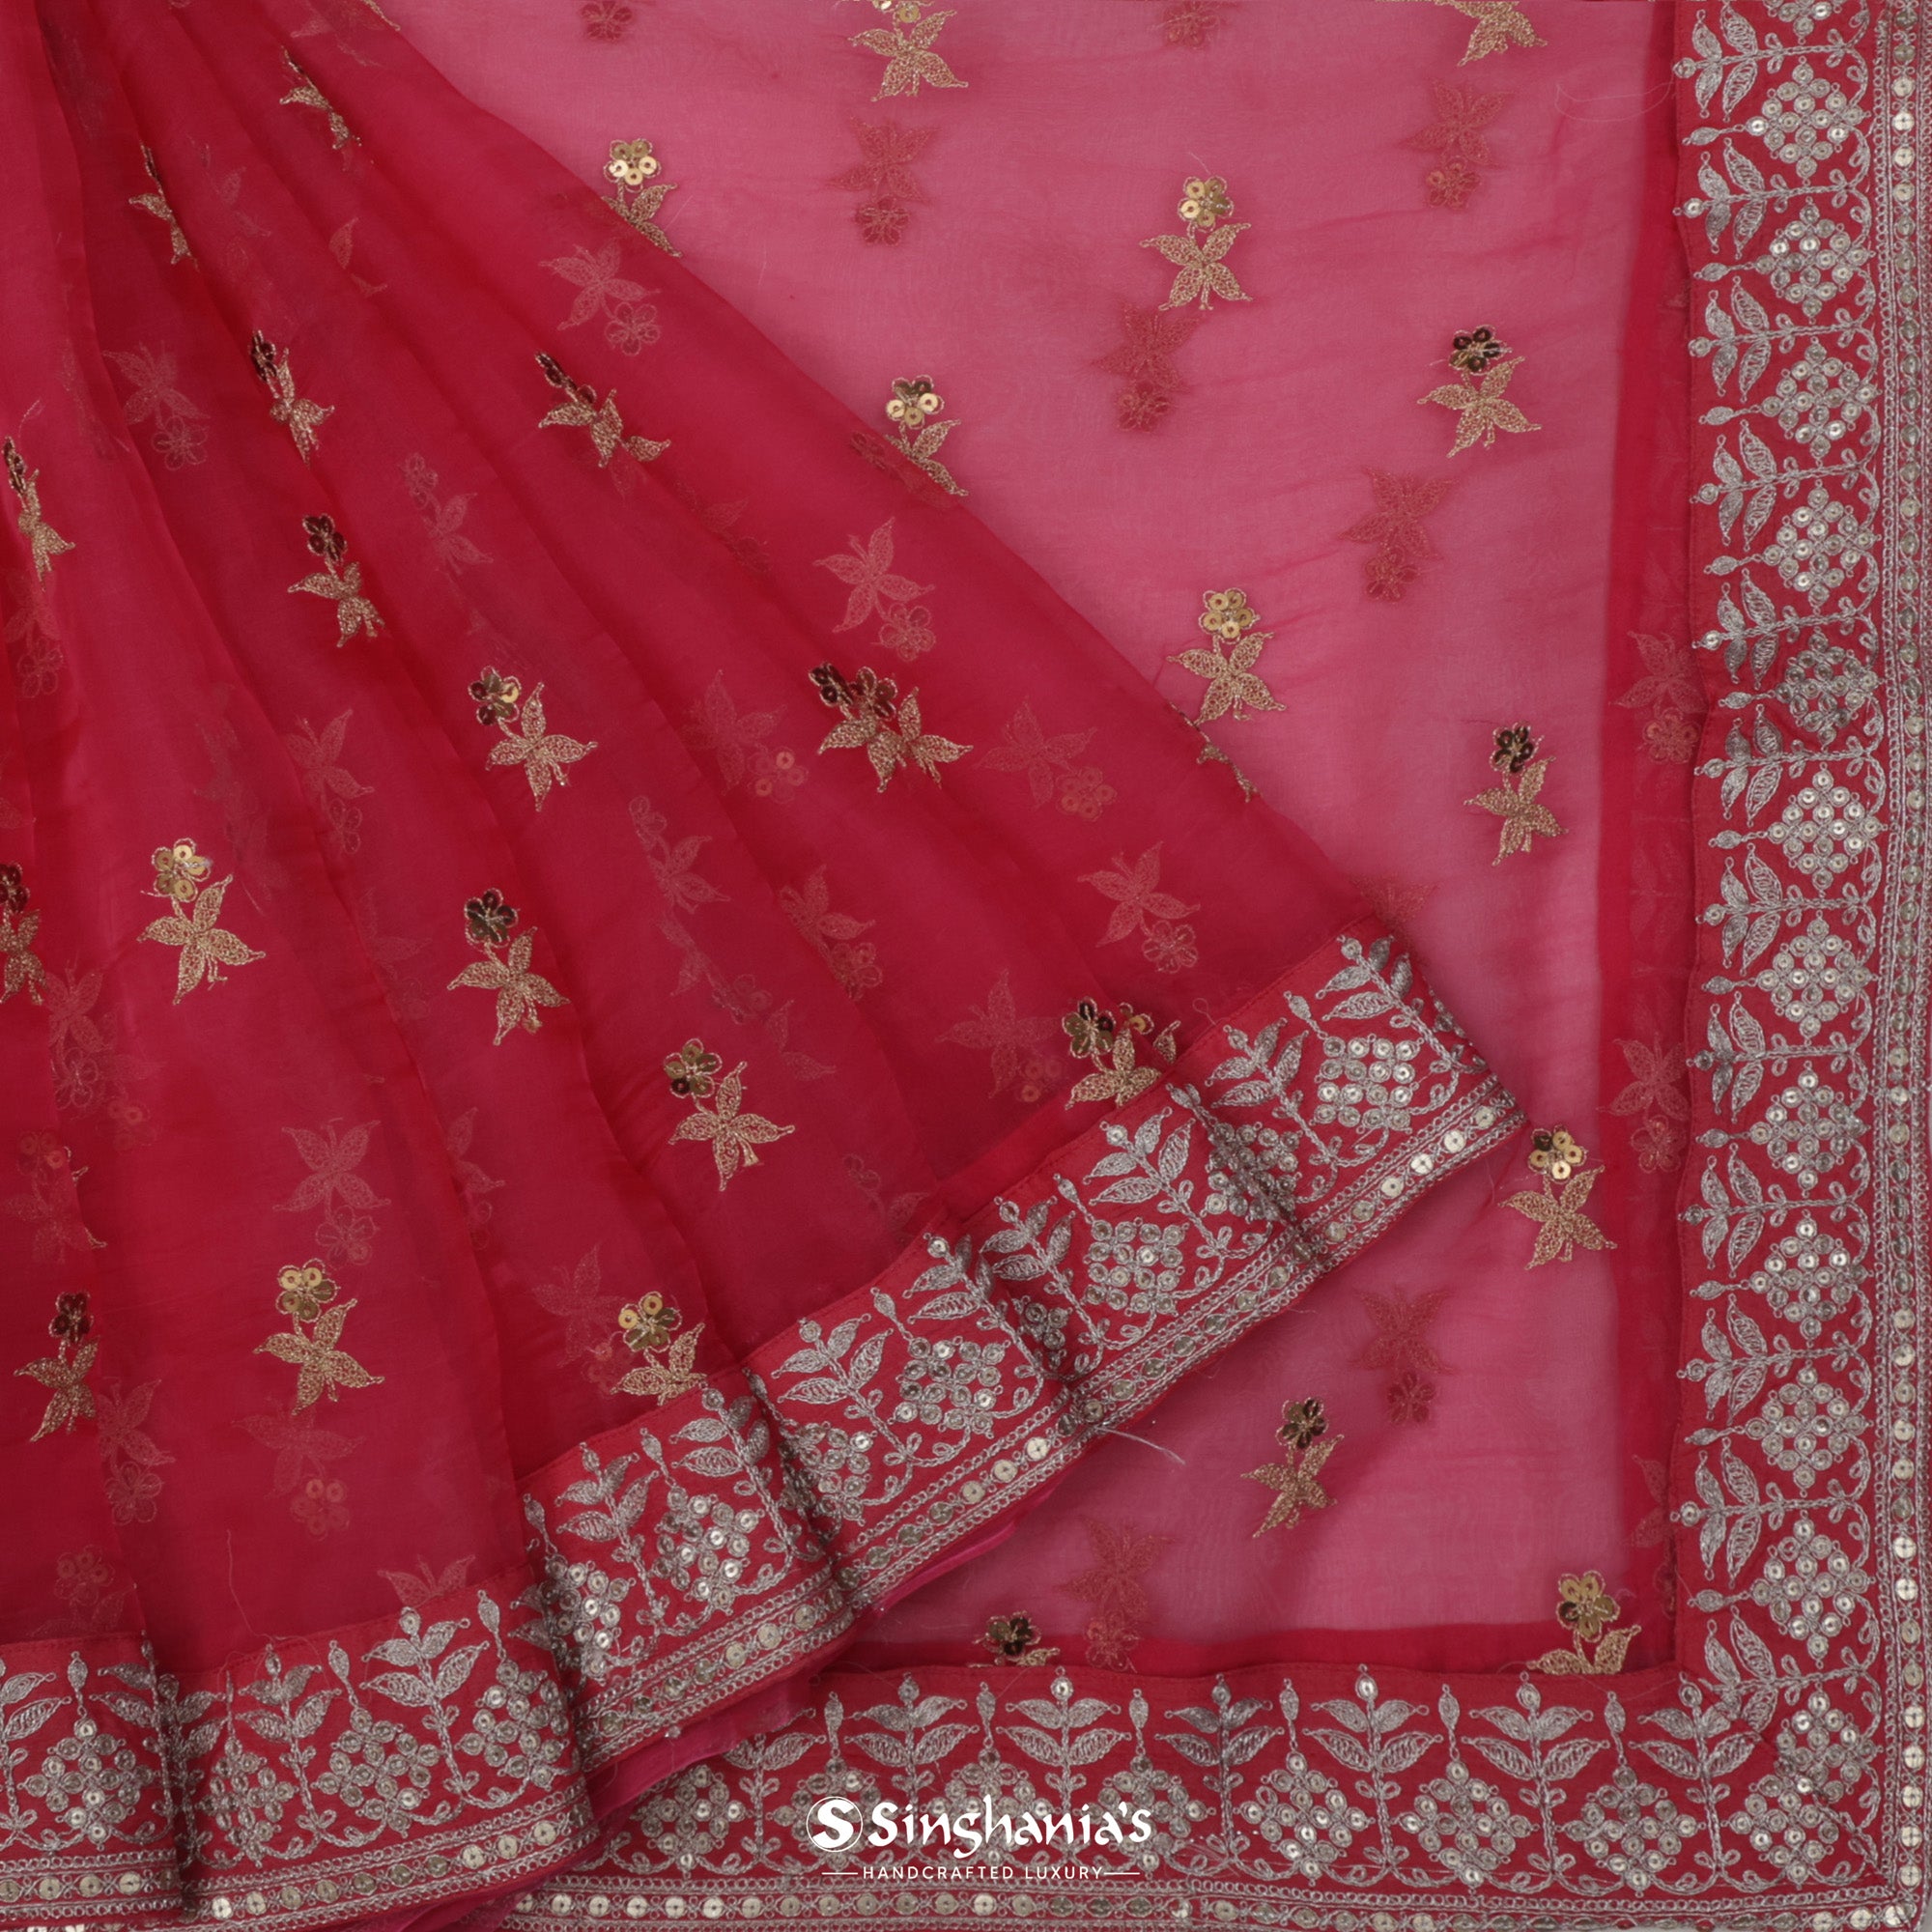 Bright Maroon-Pink Organza Saree With Floral Thread Embroidery